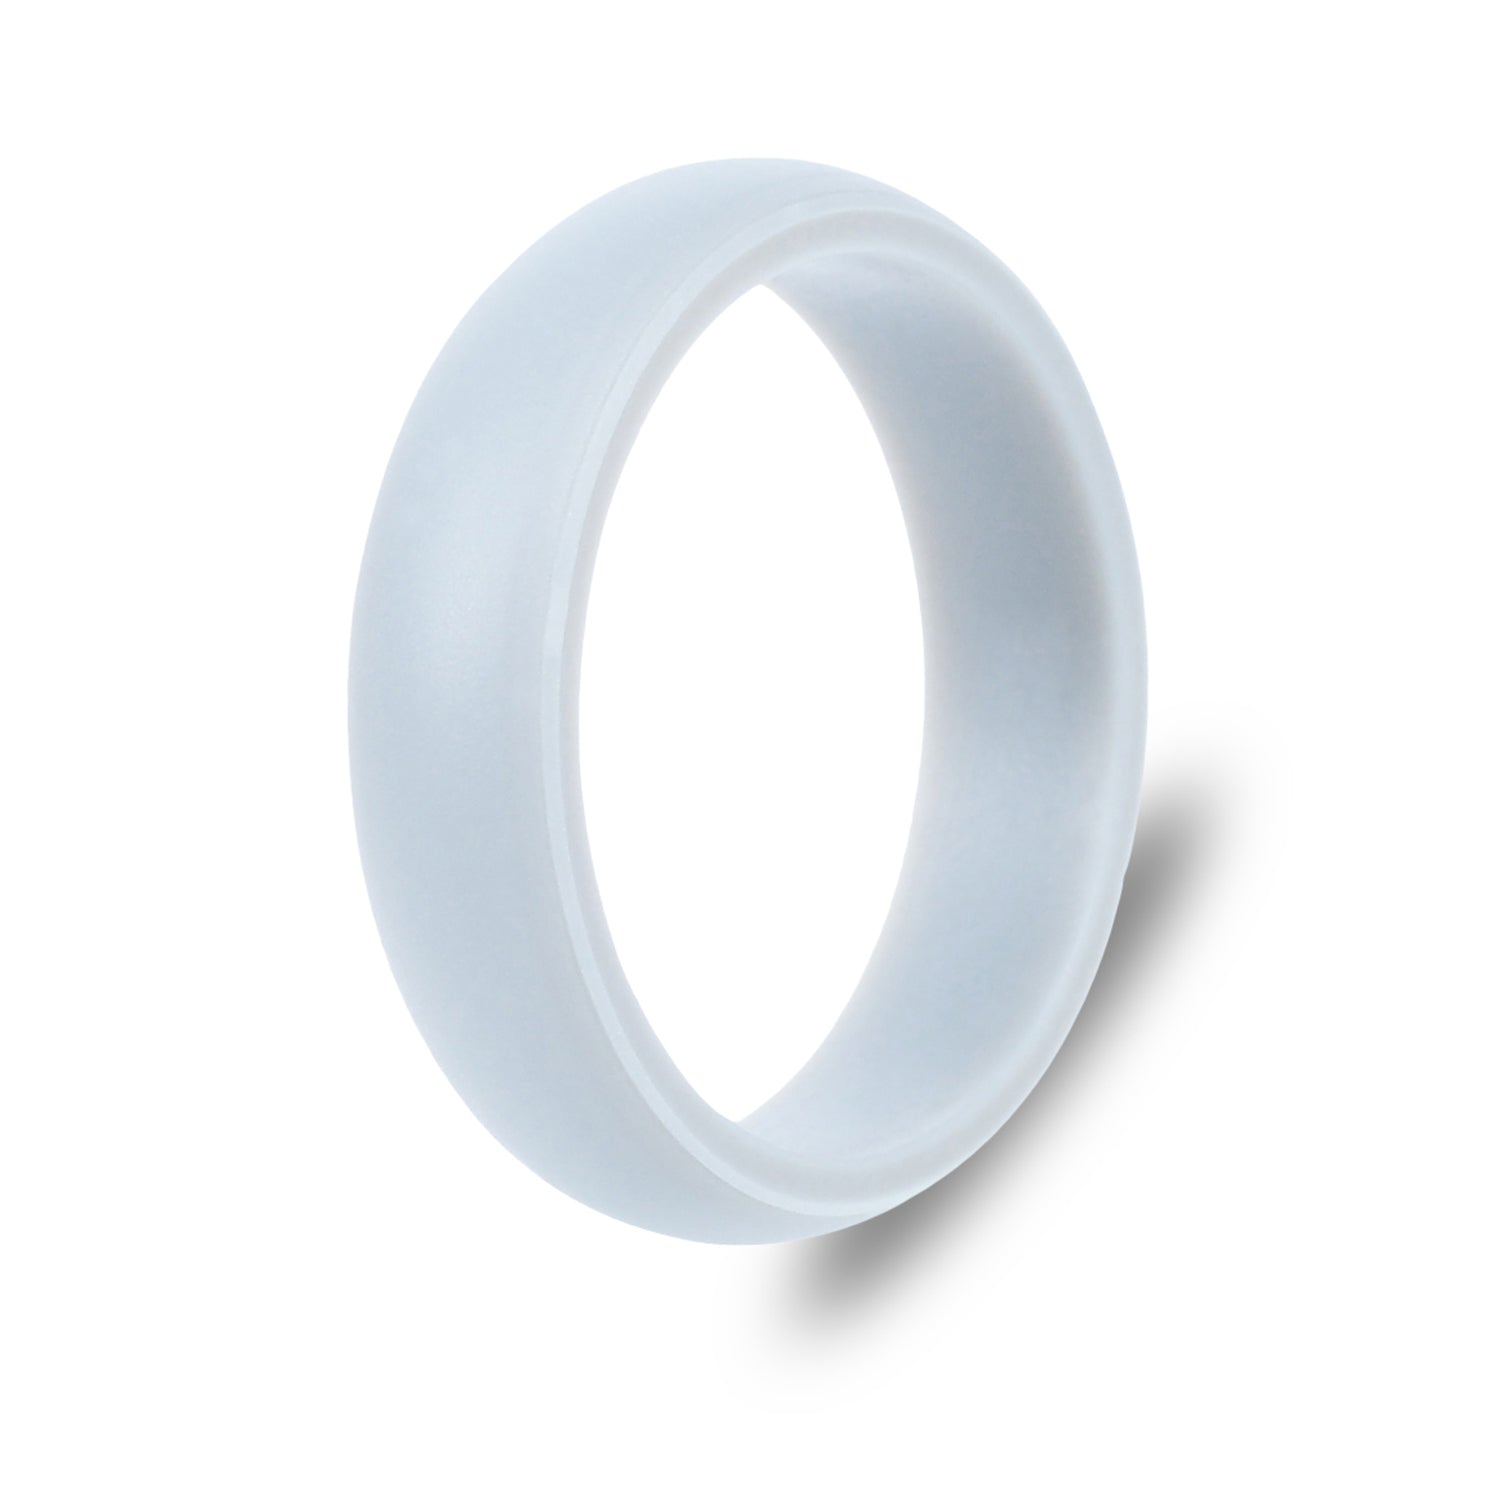 The Purist - Silicone Ring